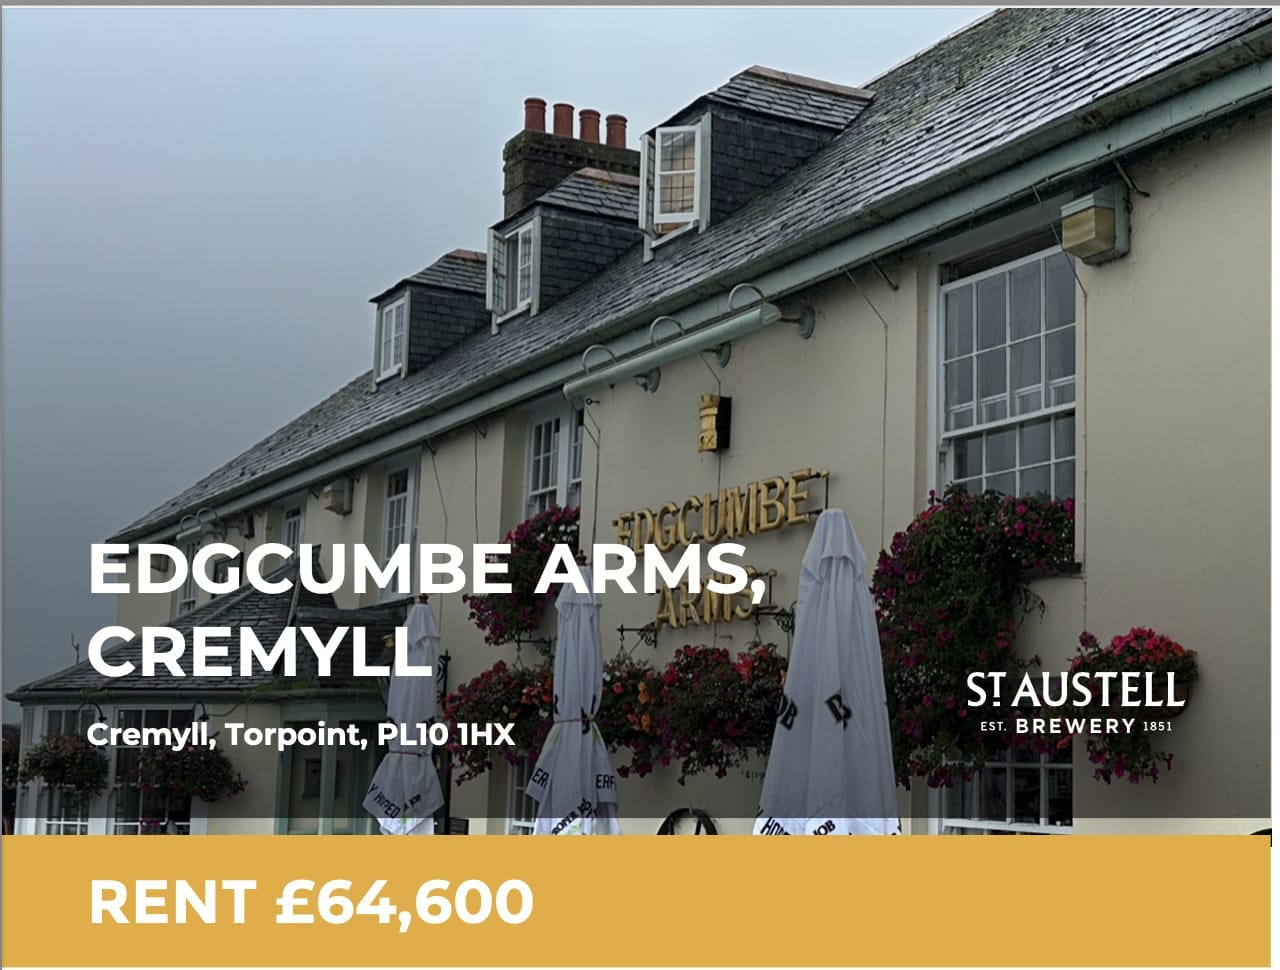 The Edgcumbe Arms Cremyll